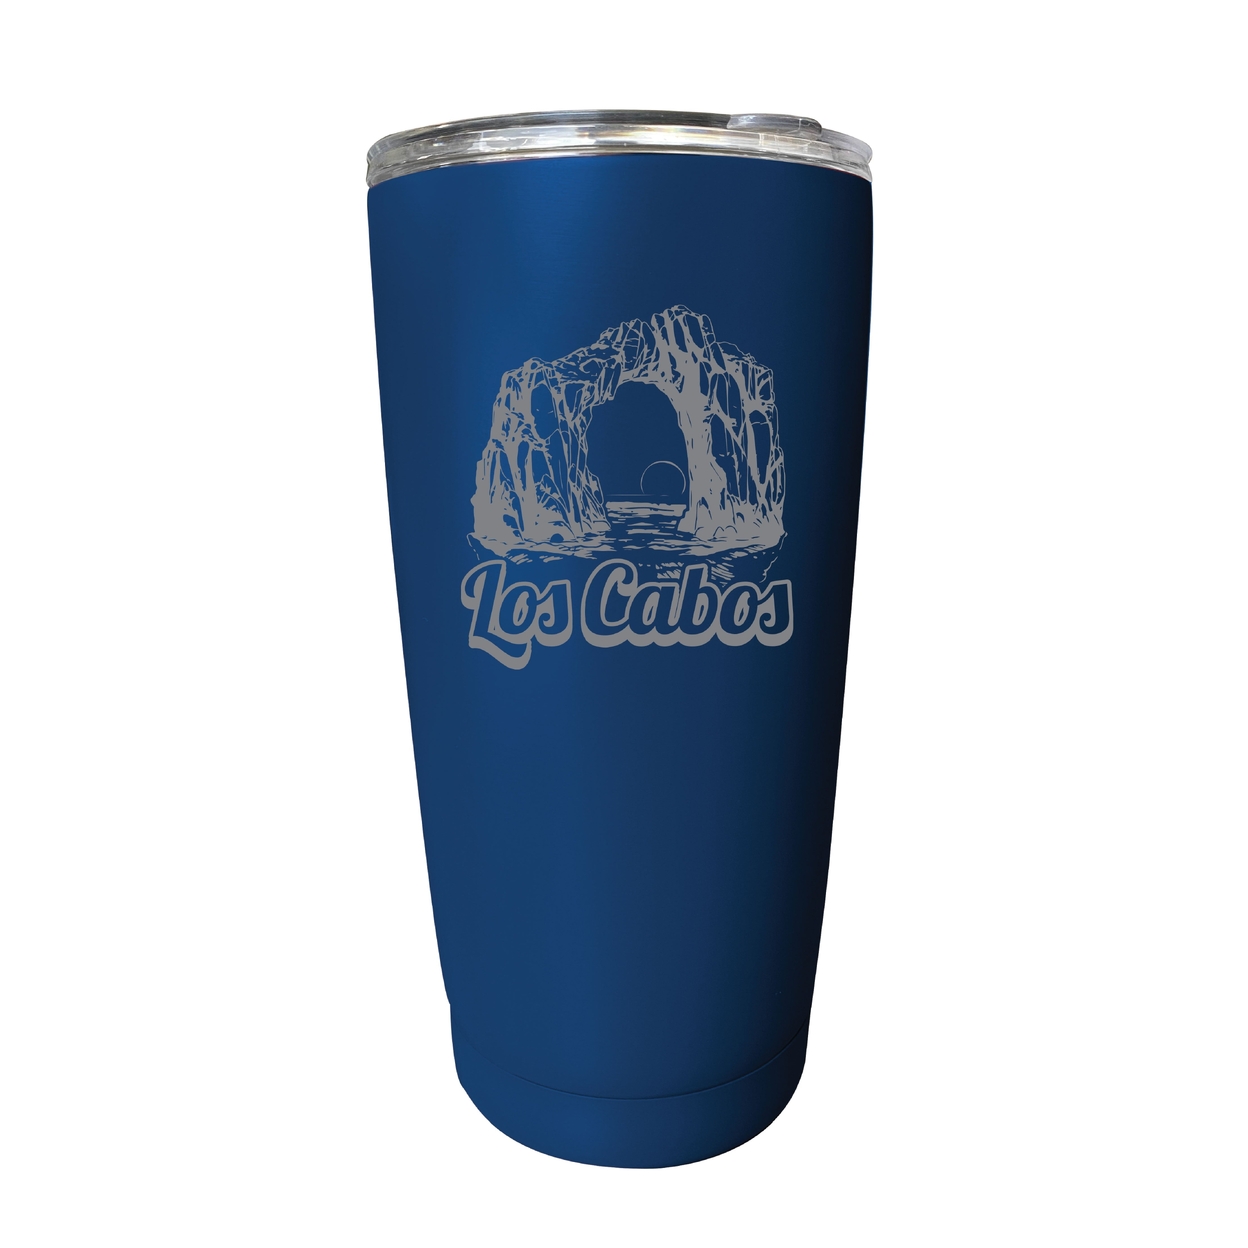 Los Cabos Mexico Souvenir 16 Oz Engraved Stainless Steel Insulated Tumbler - Navy,,Single Unit